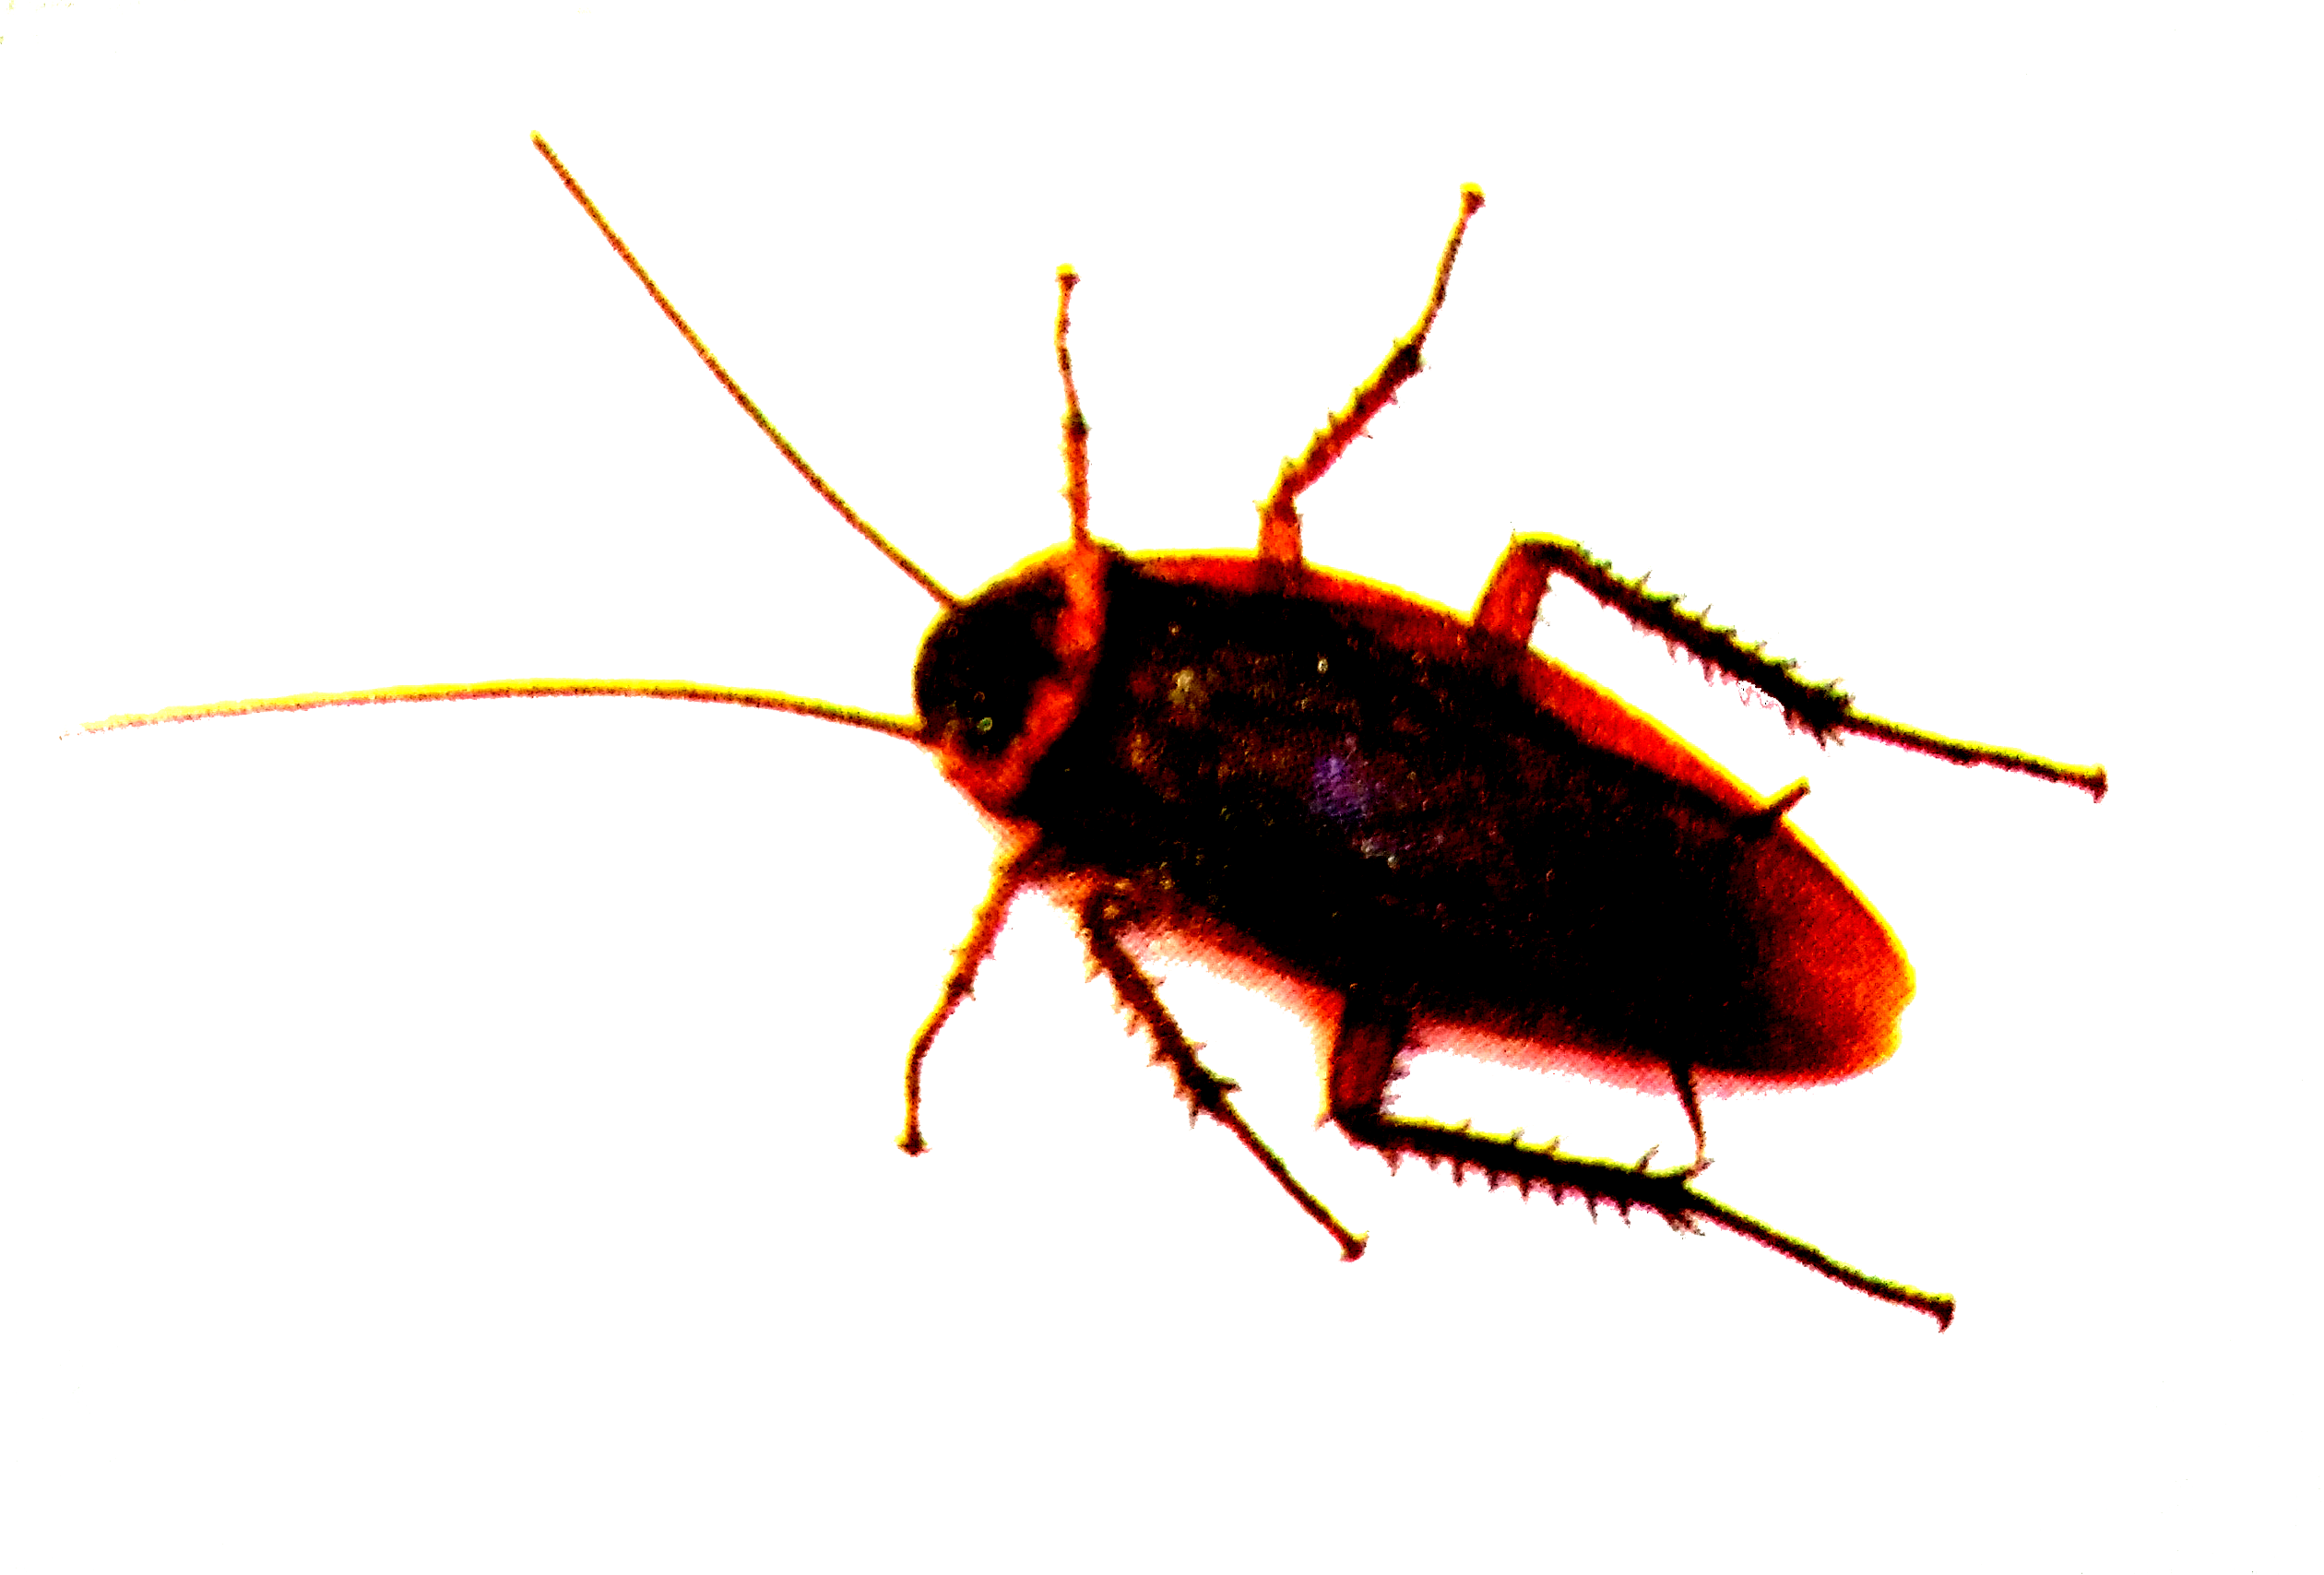 To which phylum does Cockroach belong? Justify your answer with scientific reasons.